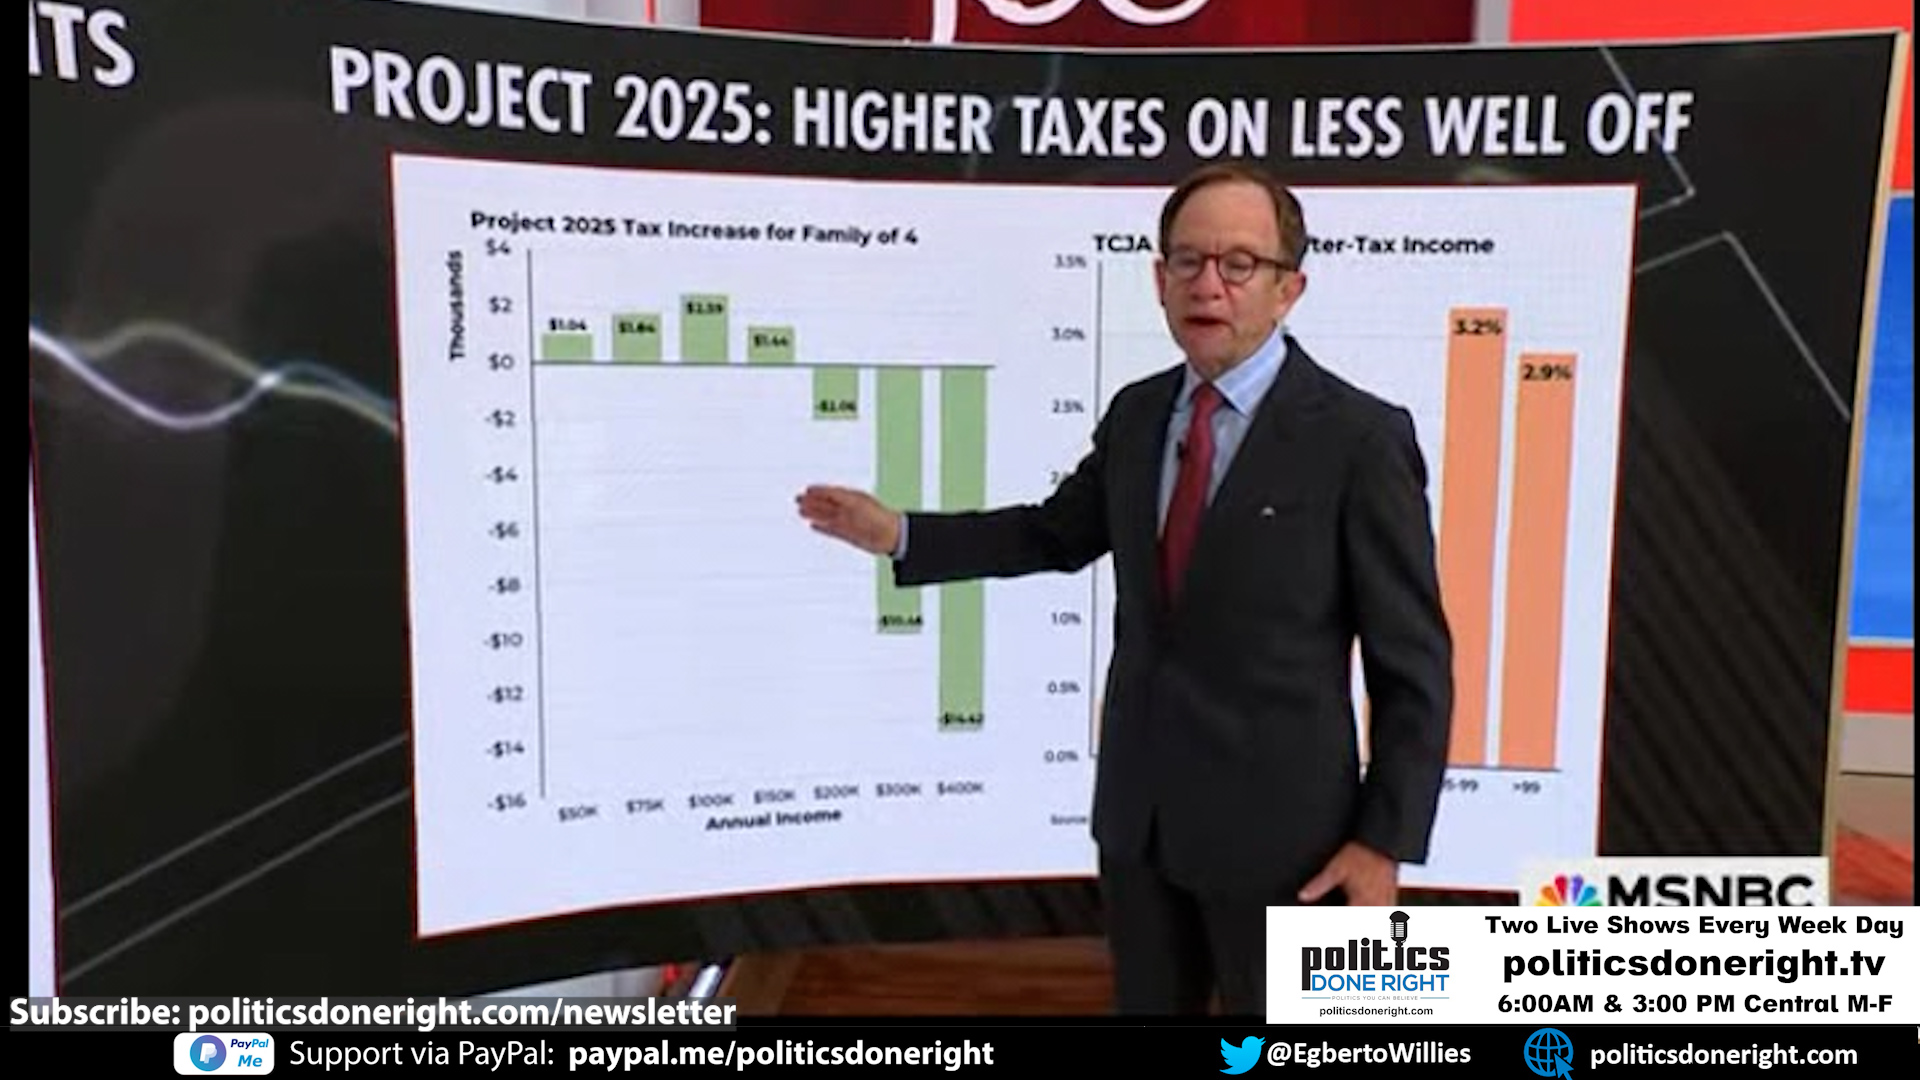 Project 2025 = Higher taxes for YOU, the working class, and the middle class.